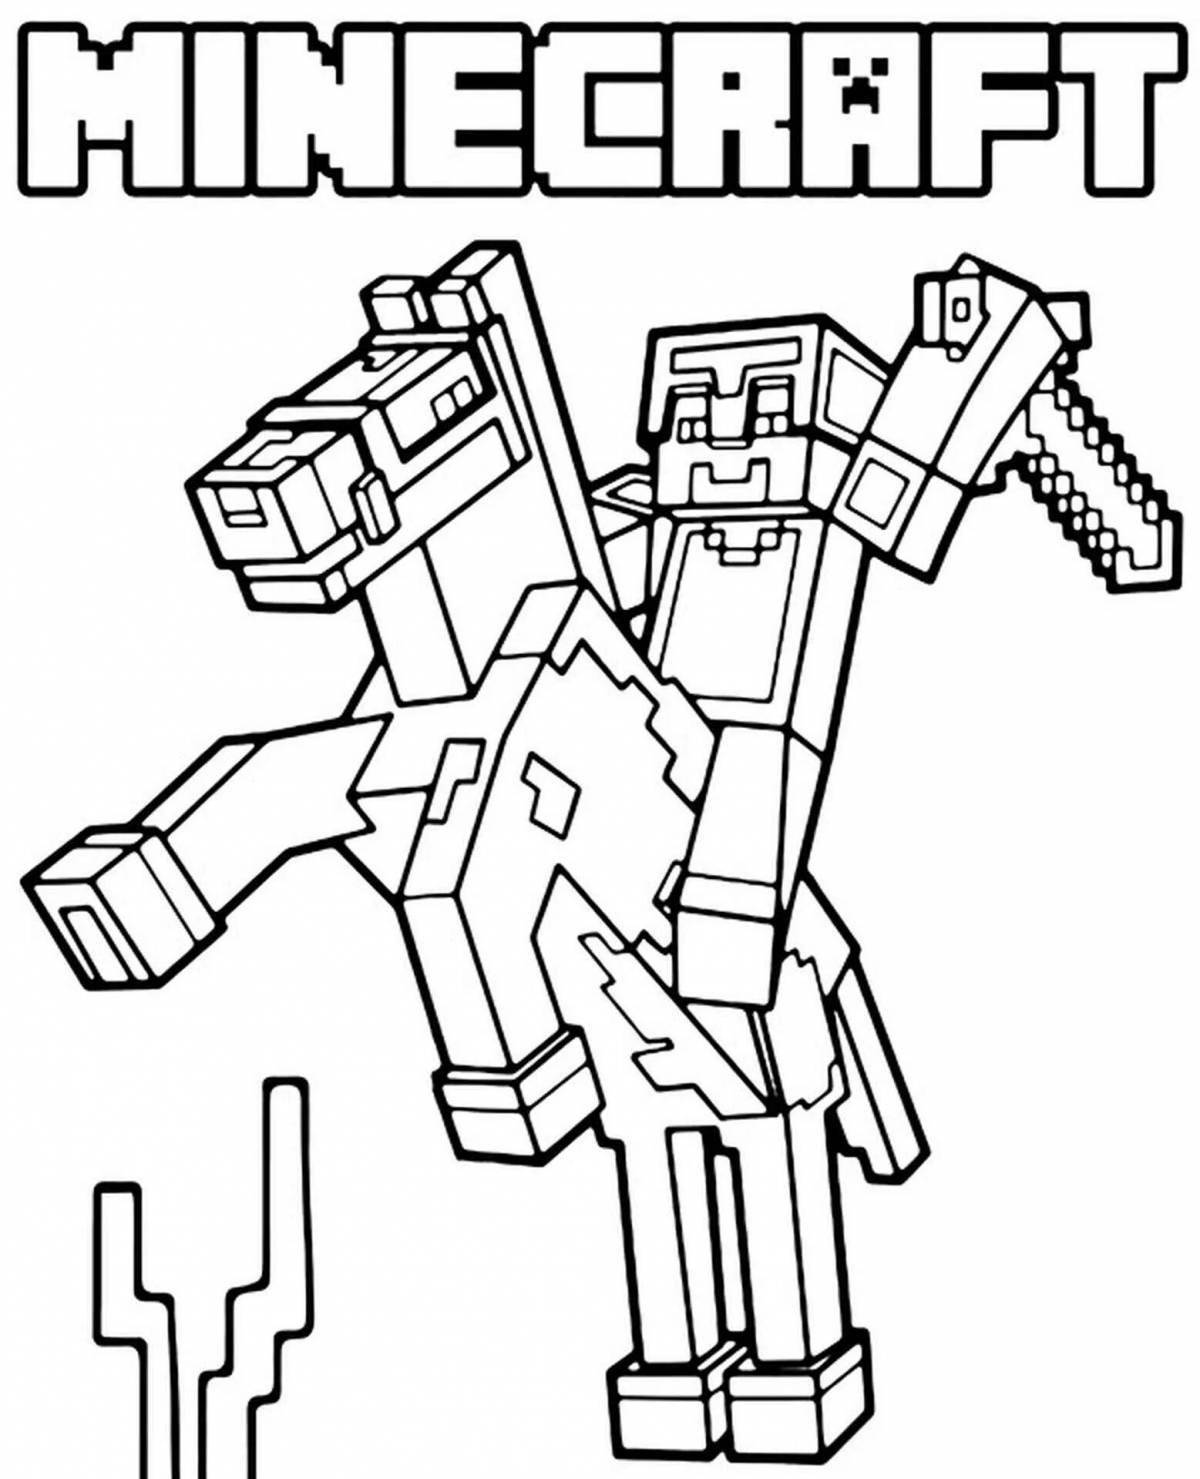 Live minecraft coloring page